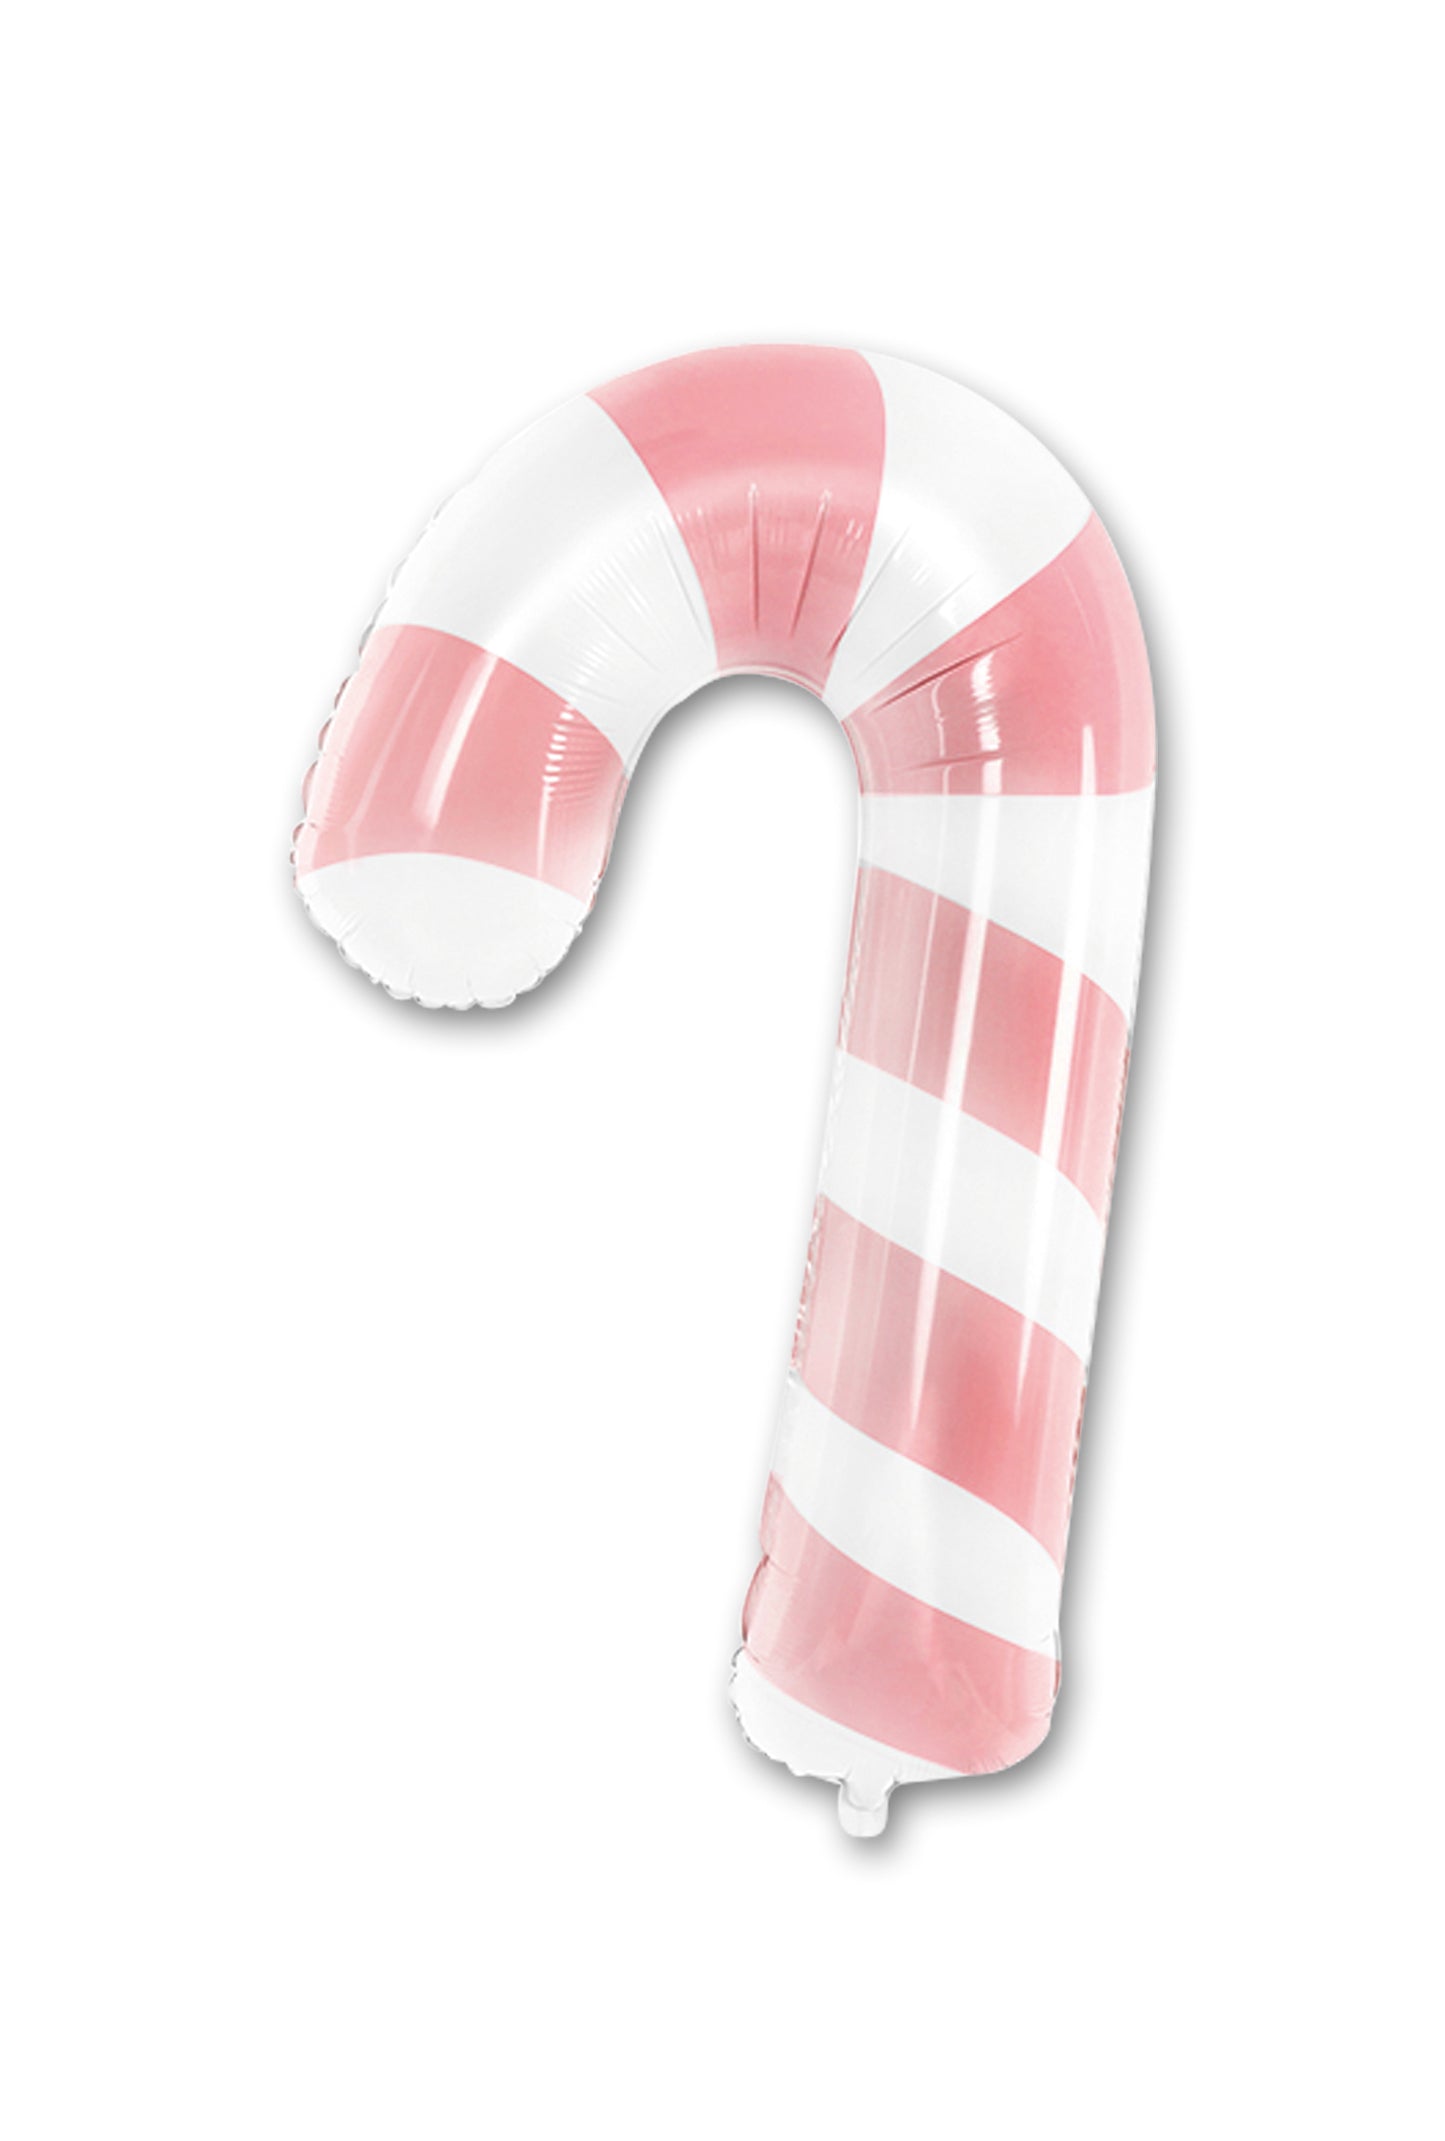 Winner Party 30" Pastel Pink Candy Cane Foil Balloon